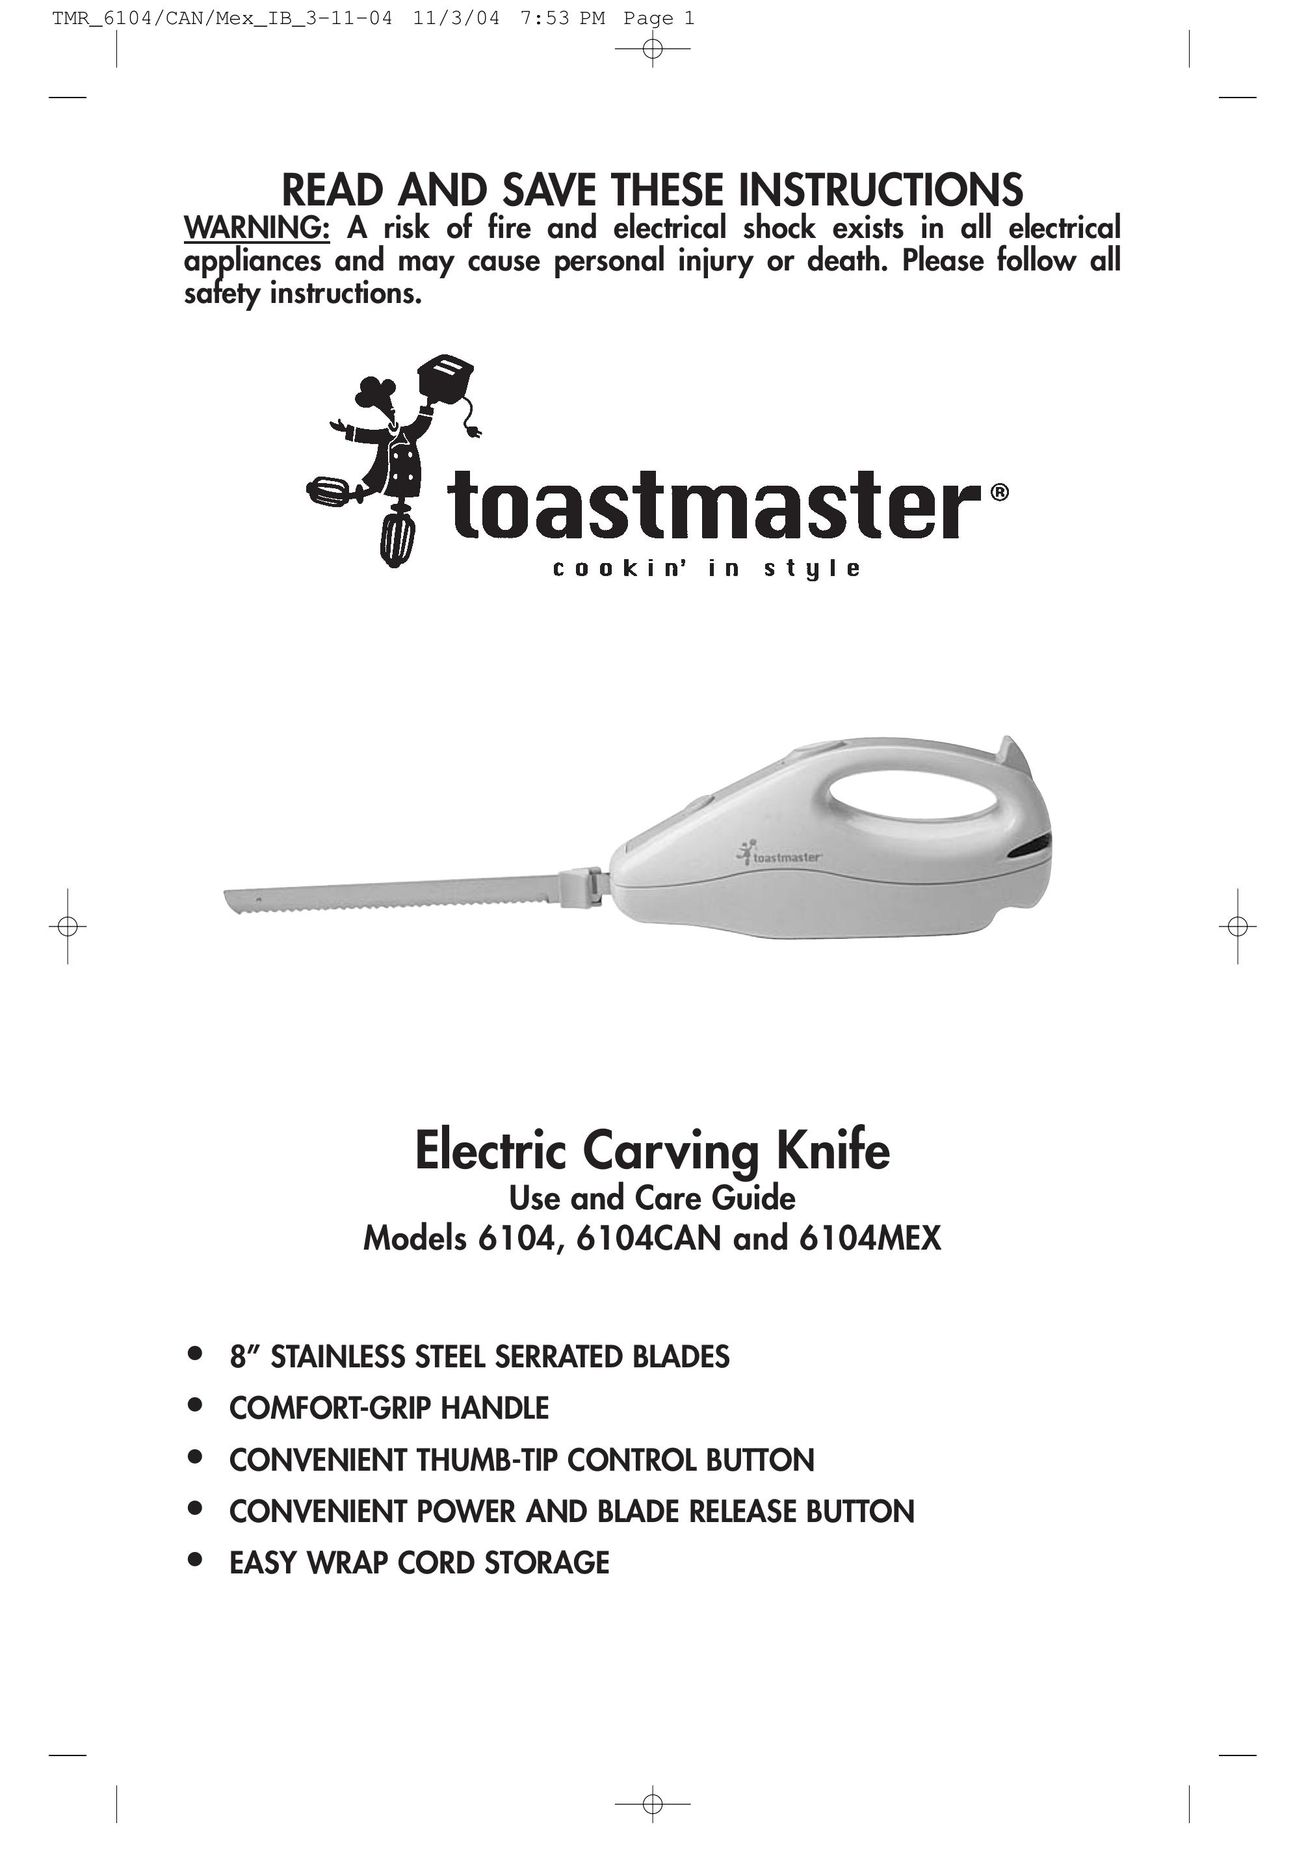 Toastmaster 6104CAN Kitchen Utensil User Manual